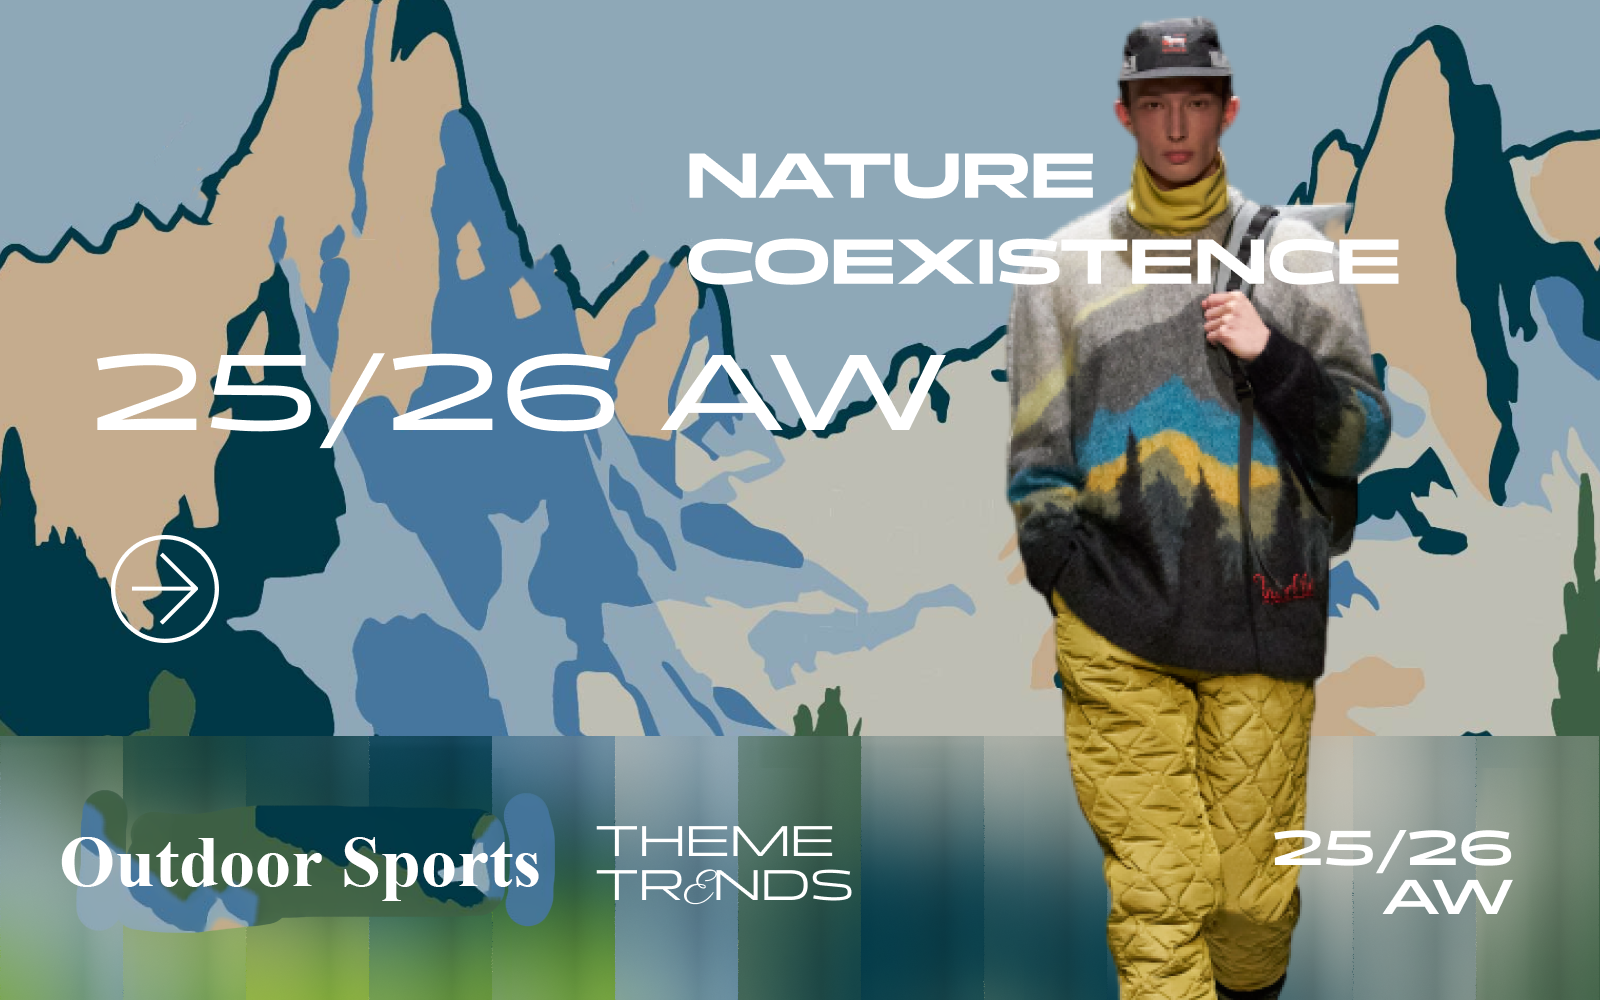 Nature Coexistence  -- A/W 25/26 Outdoor Sports Thematic Pattern Trend